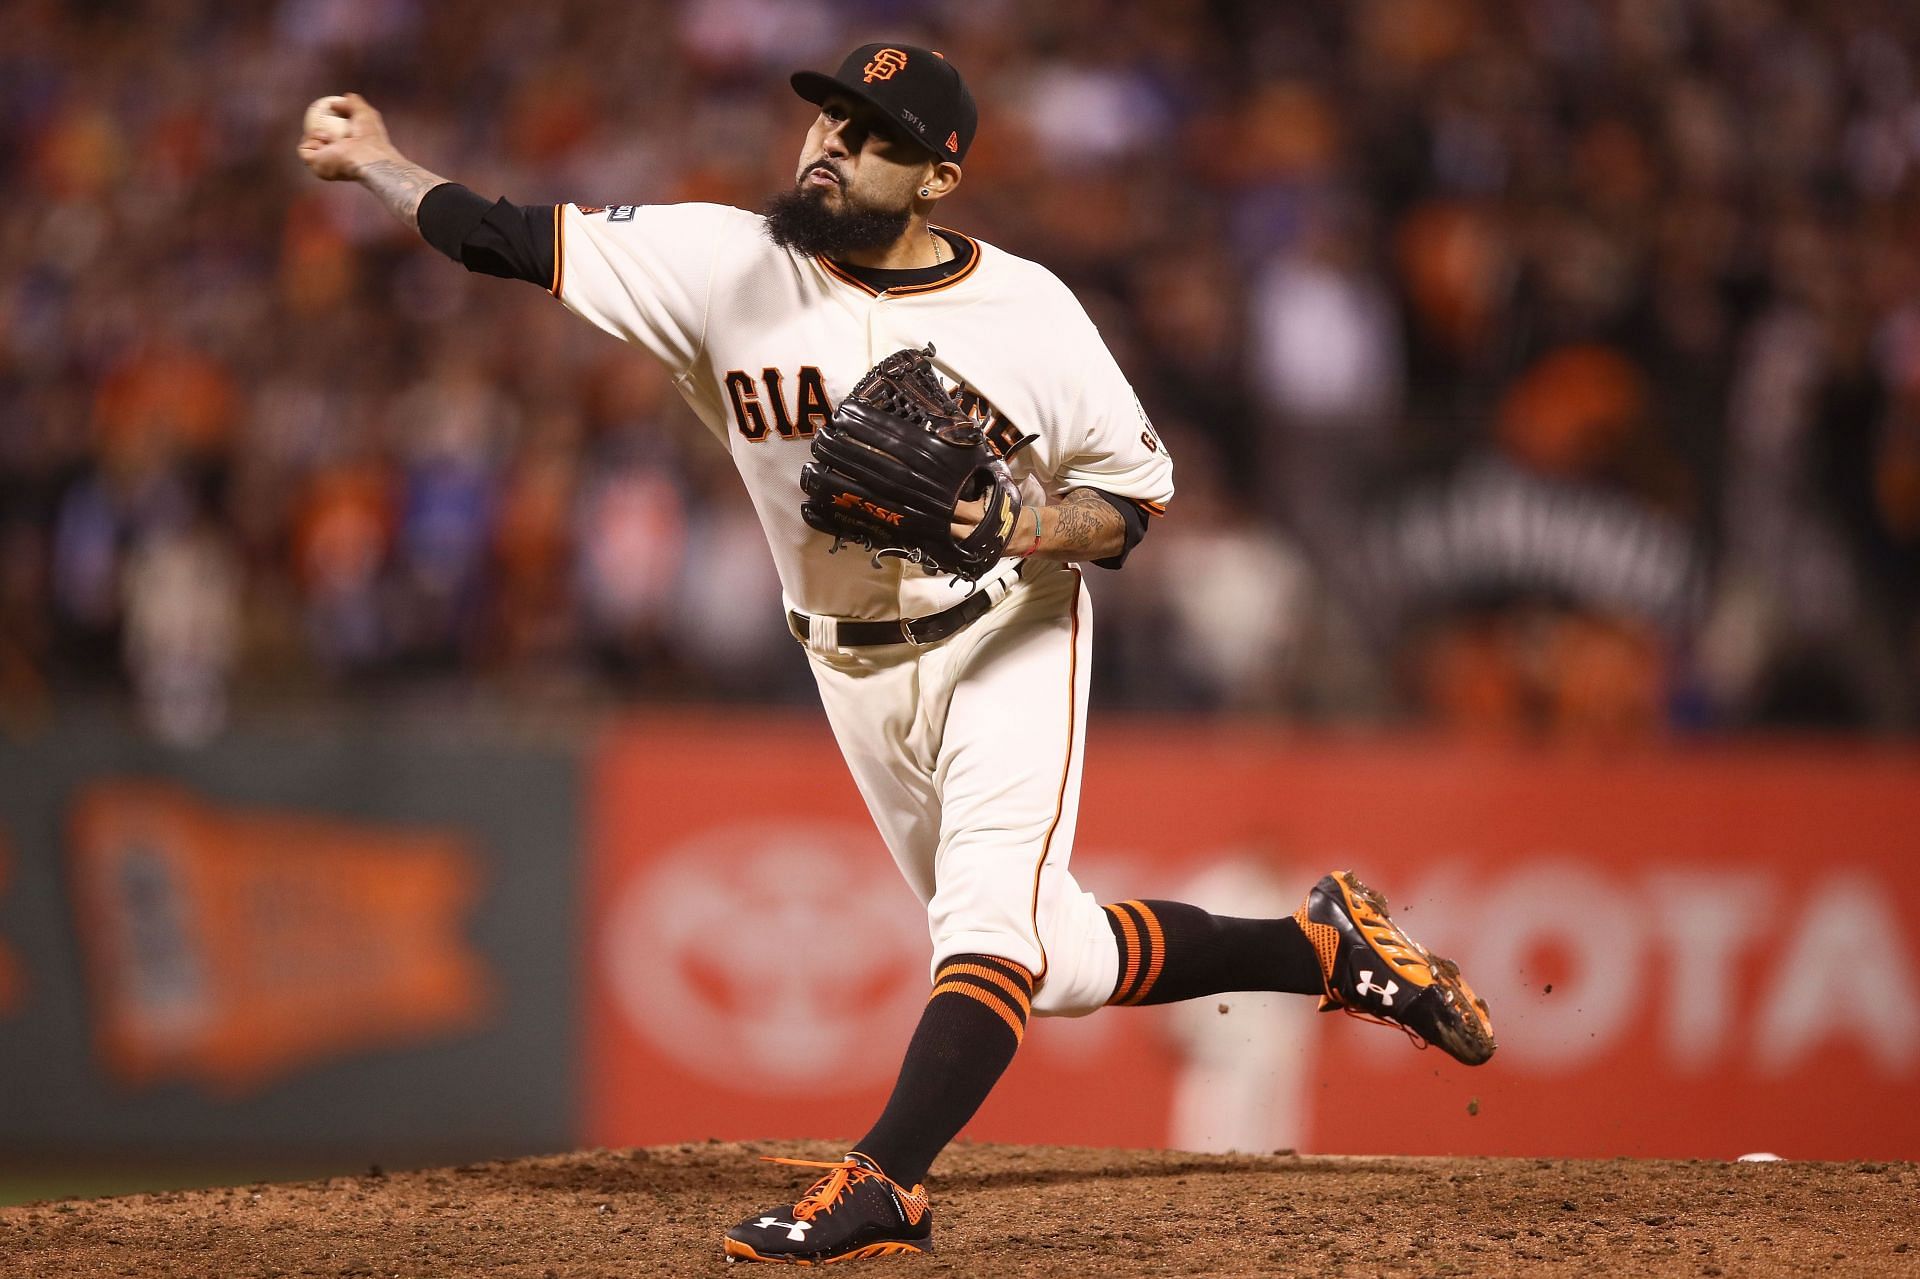 Sergio Romo becomes rare opponent to visit Giants clubhouse